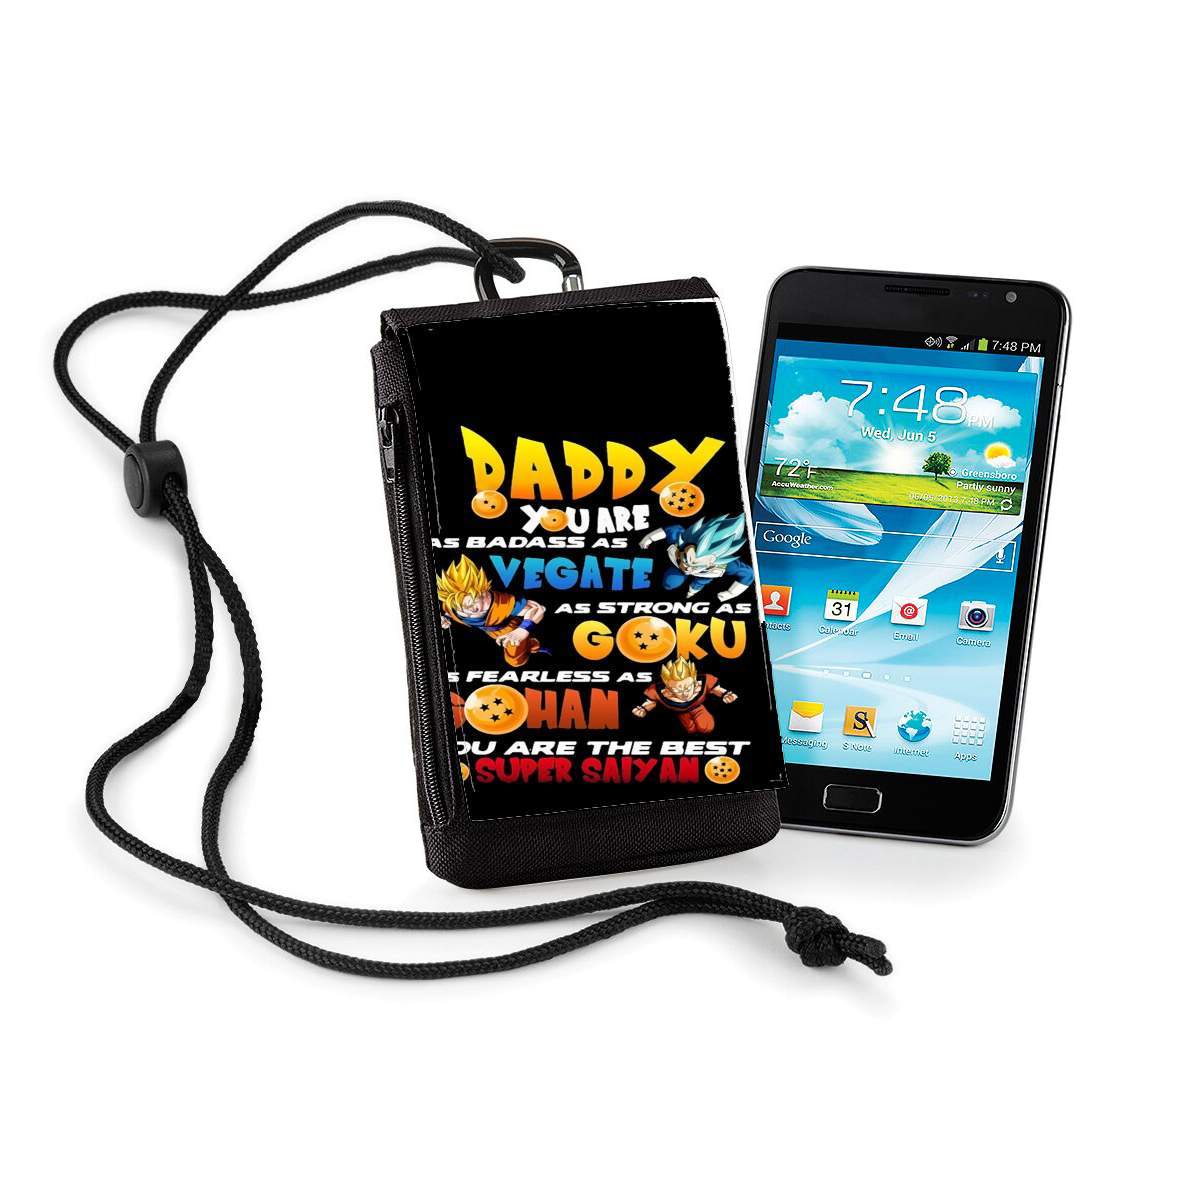 Pochette de téléphone - Taille normal pour Daddy you are as badass as Vegeta As strong as Goku as fearless as Gohan You are the best